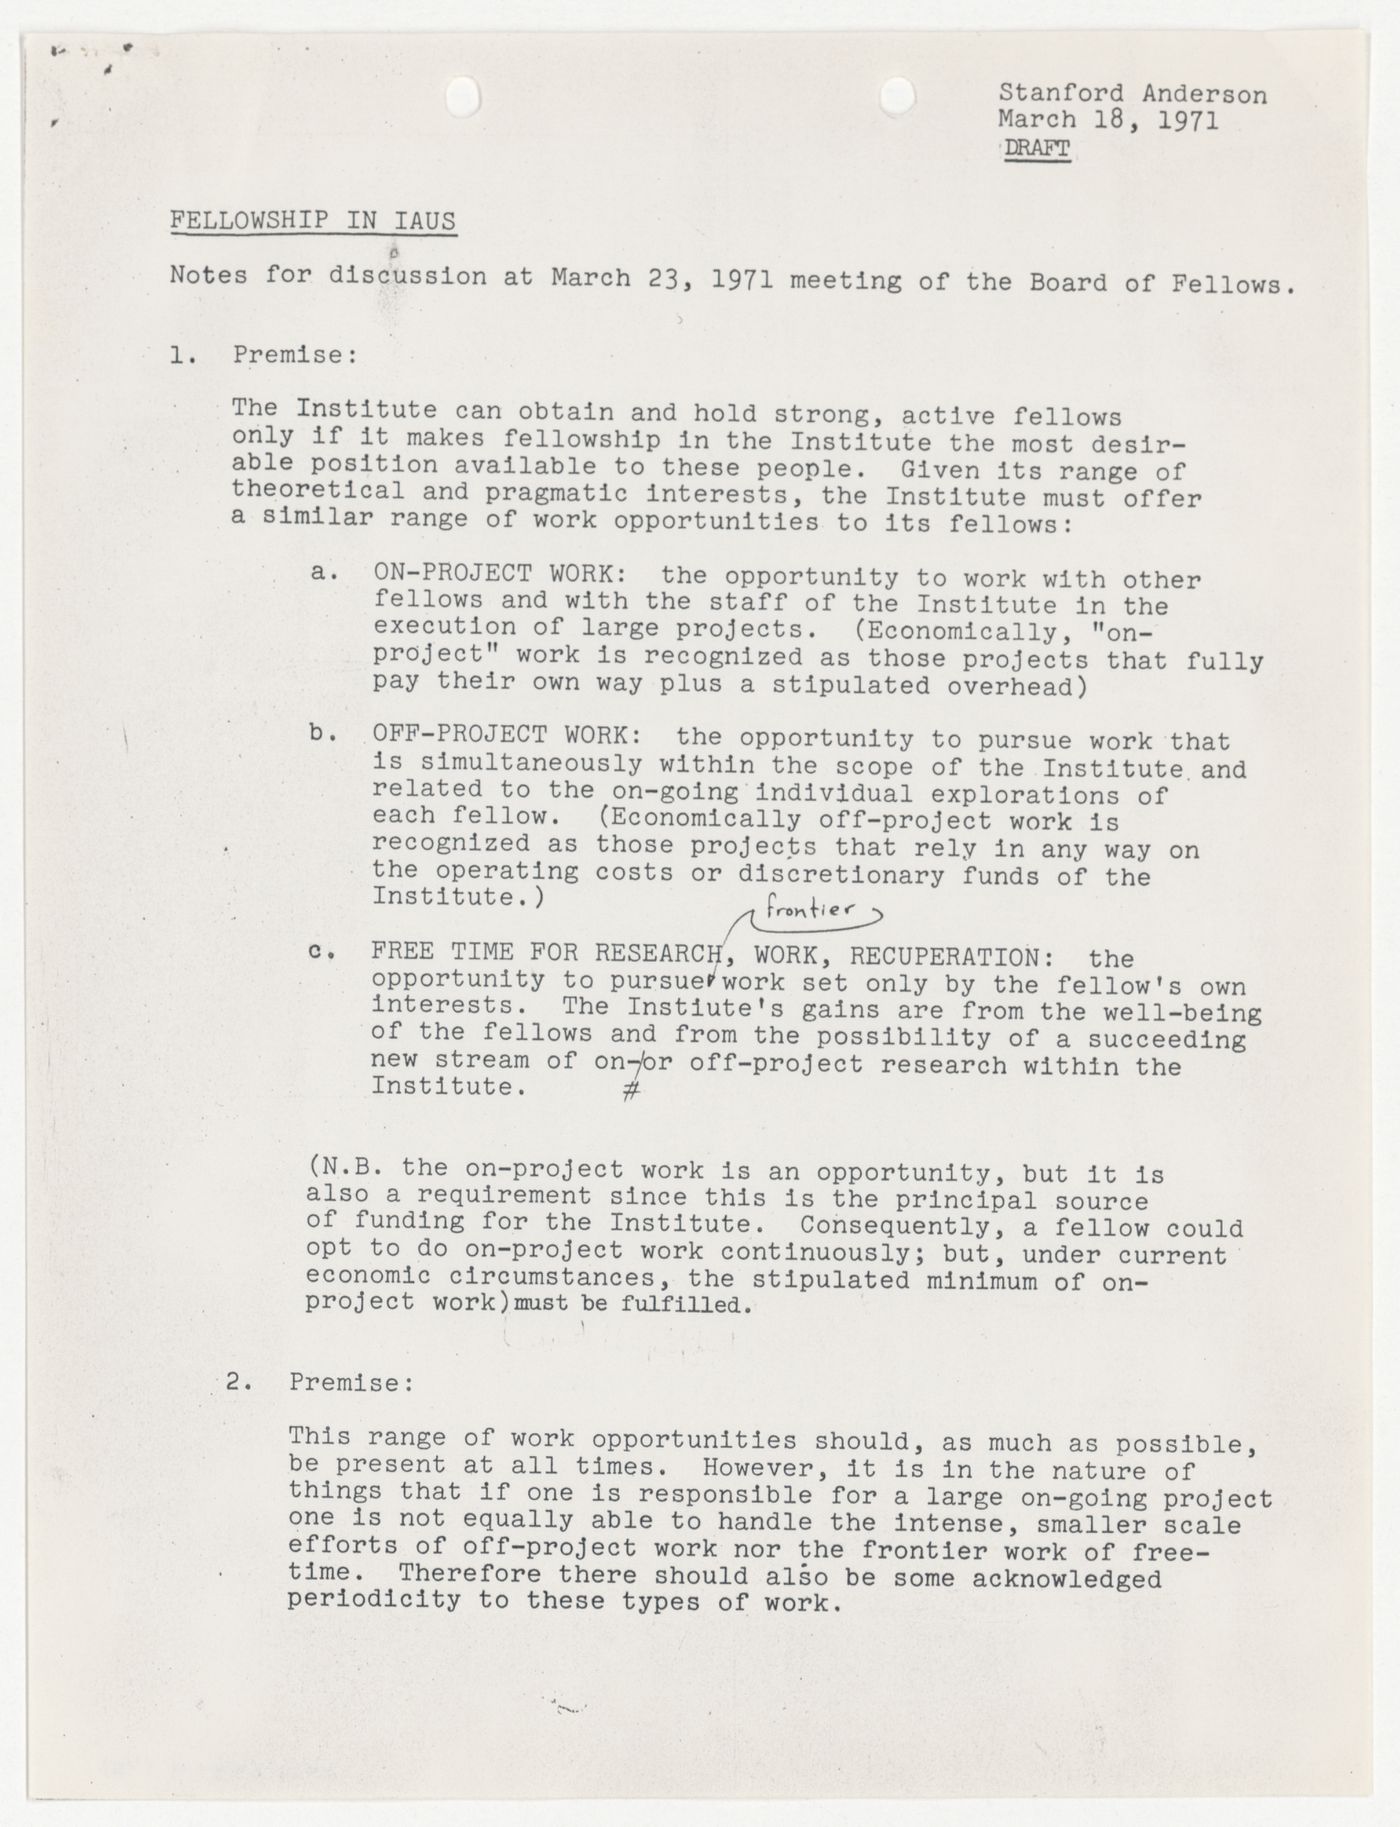 Discussion notes for the Board of Fellows meeting of March 23, 1971